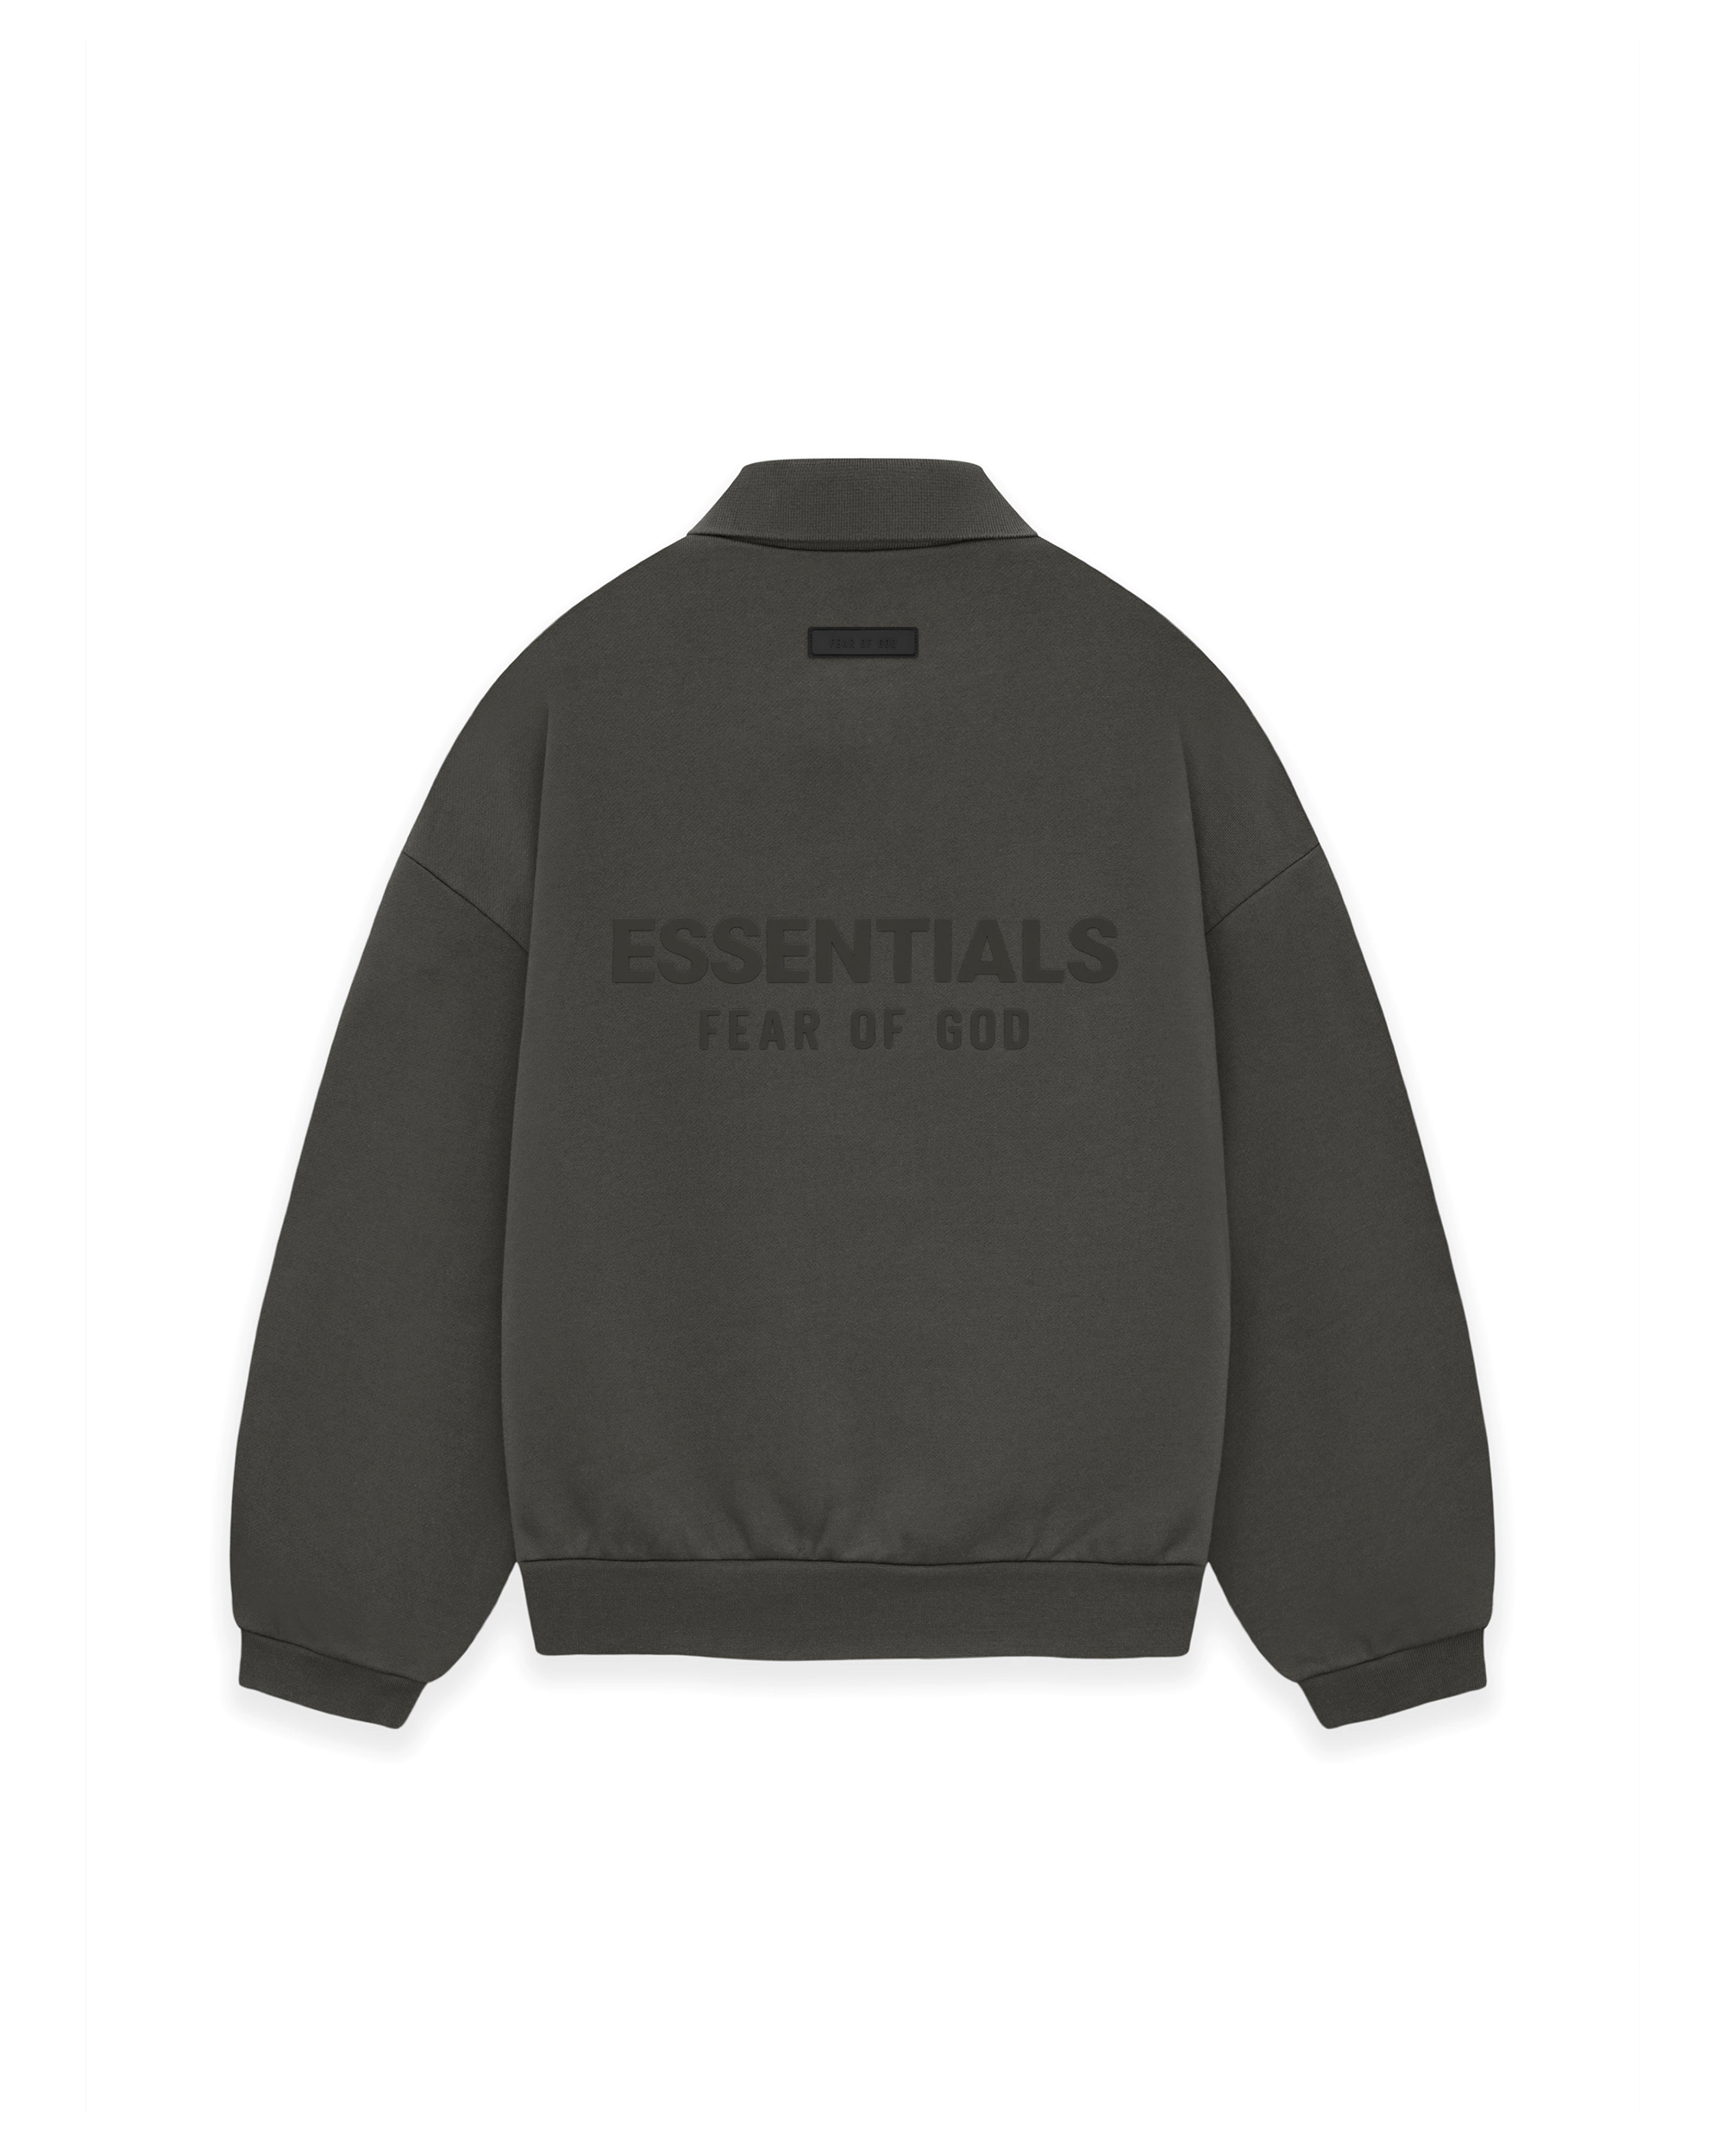 Essentials L/S Polo - Ink